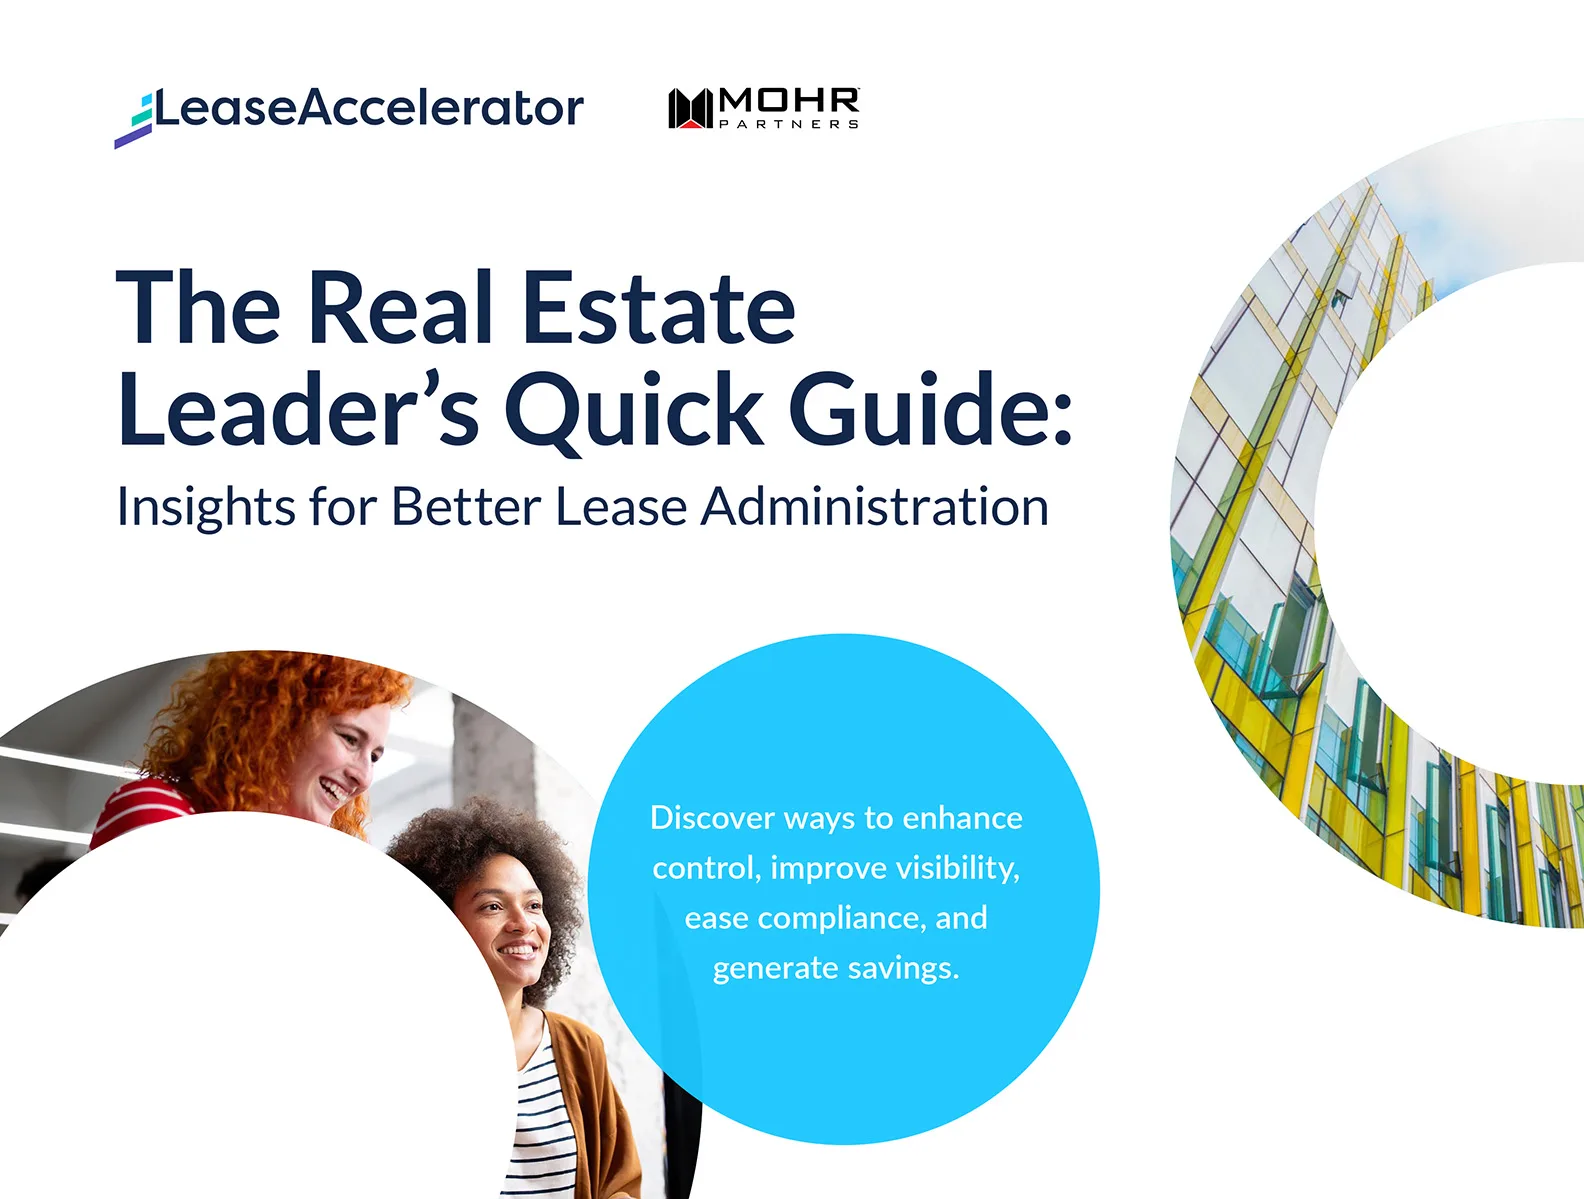 The Real Estate Leader’s Quick Guide: Insights for Better Lease Administration